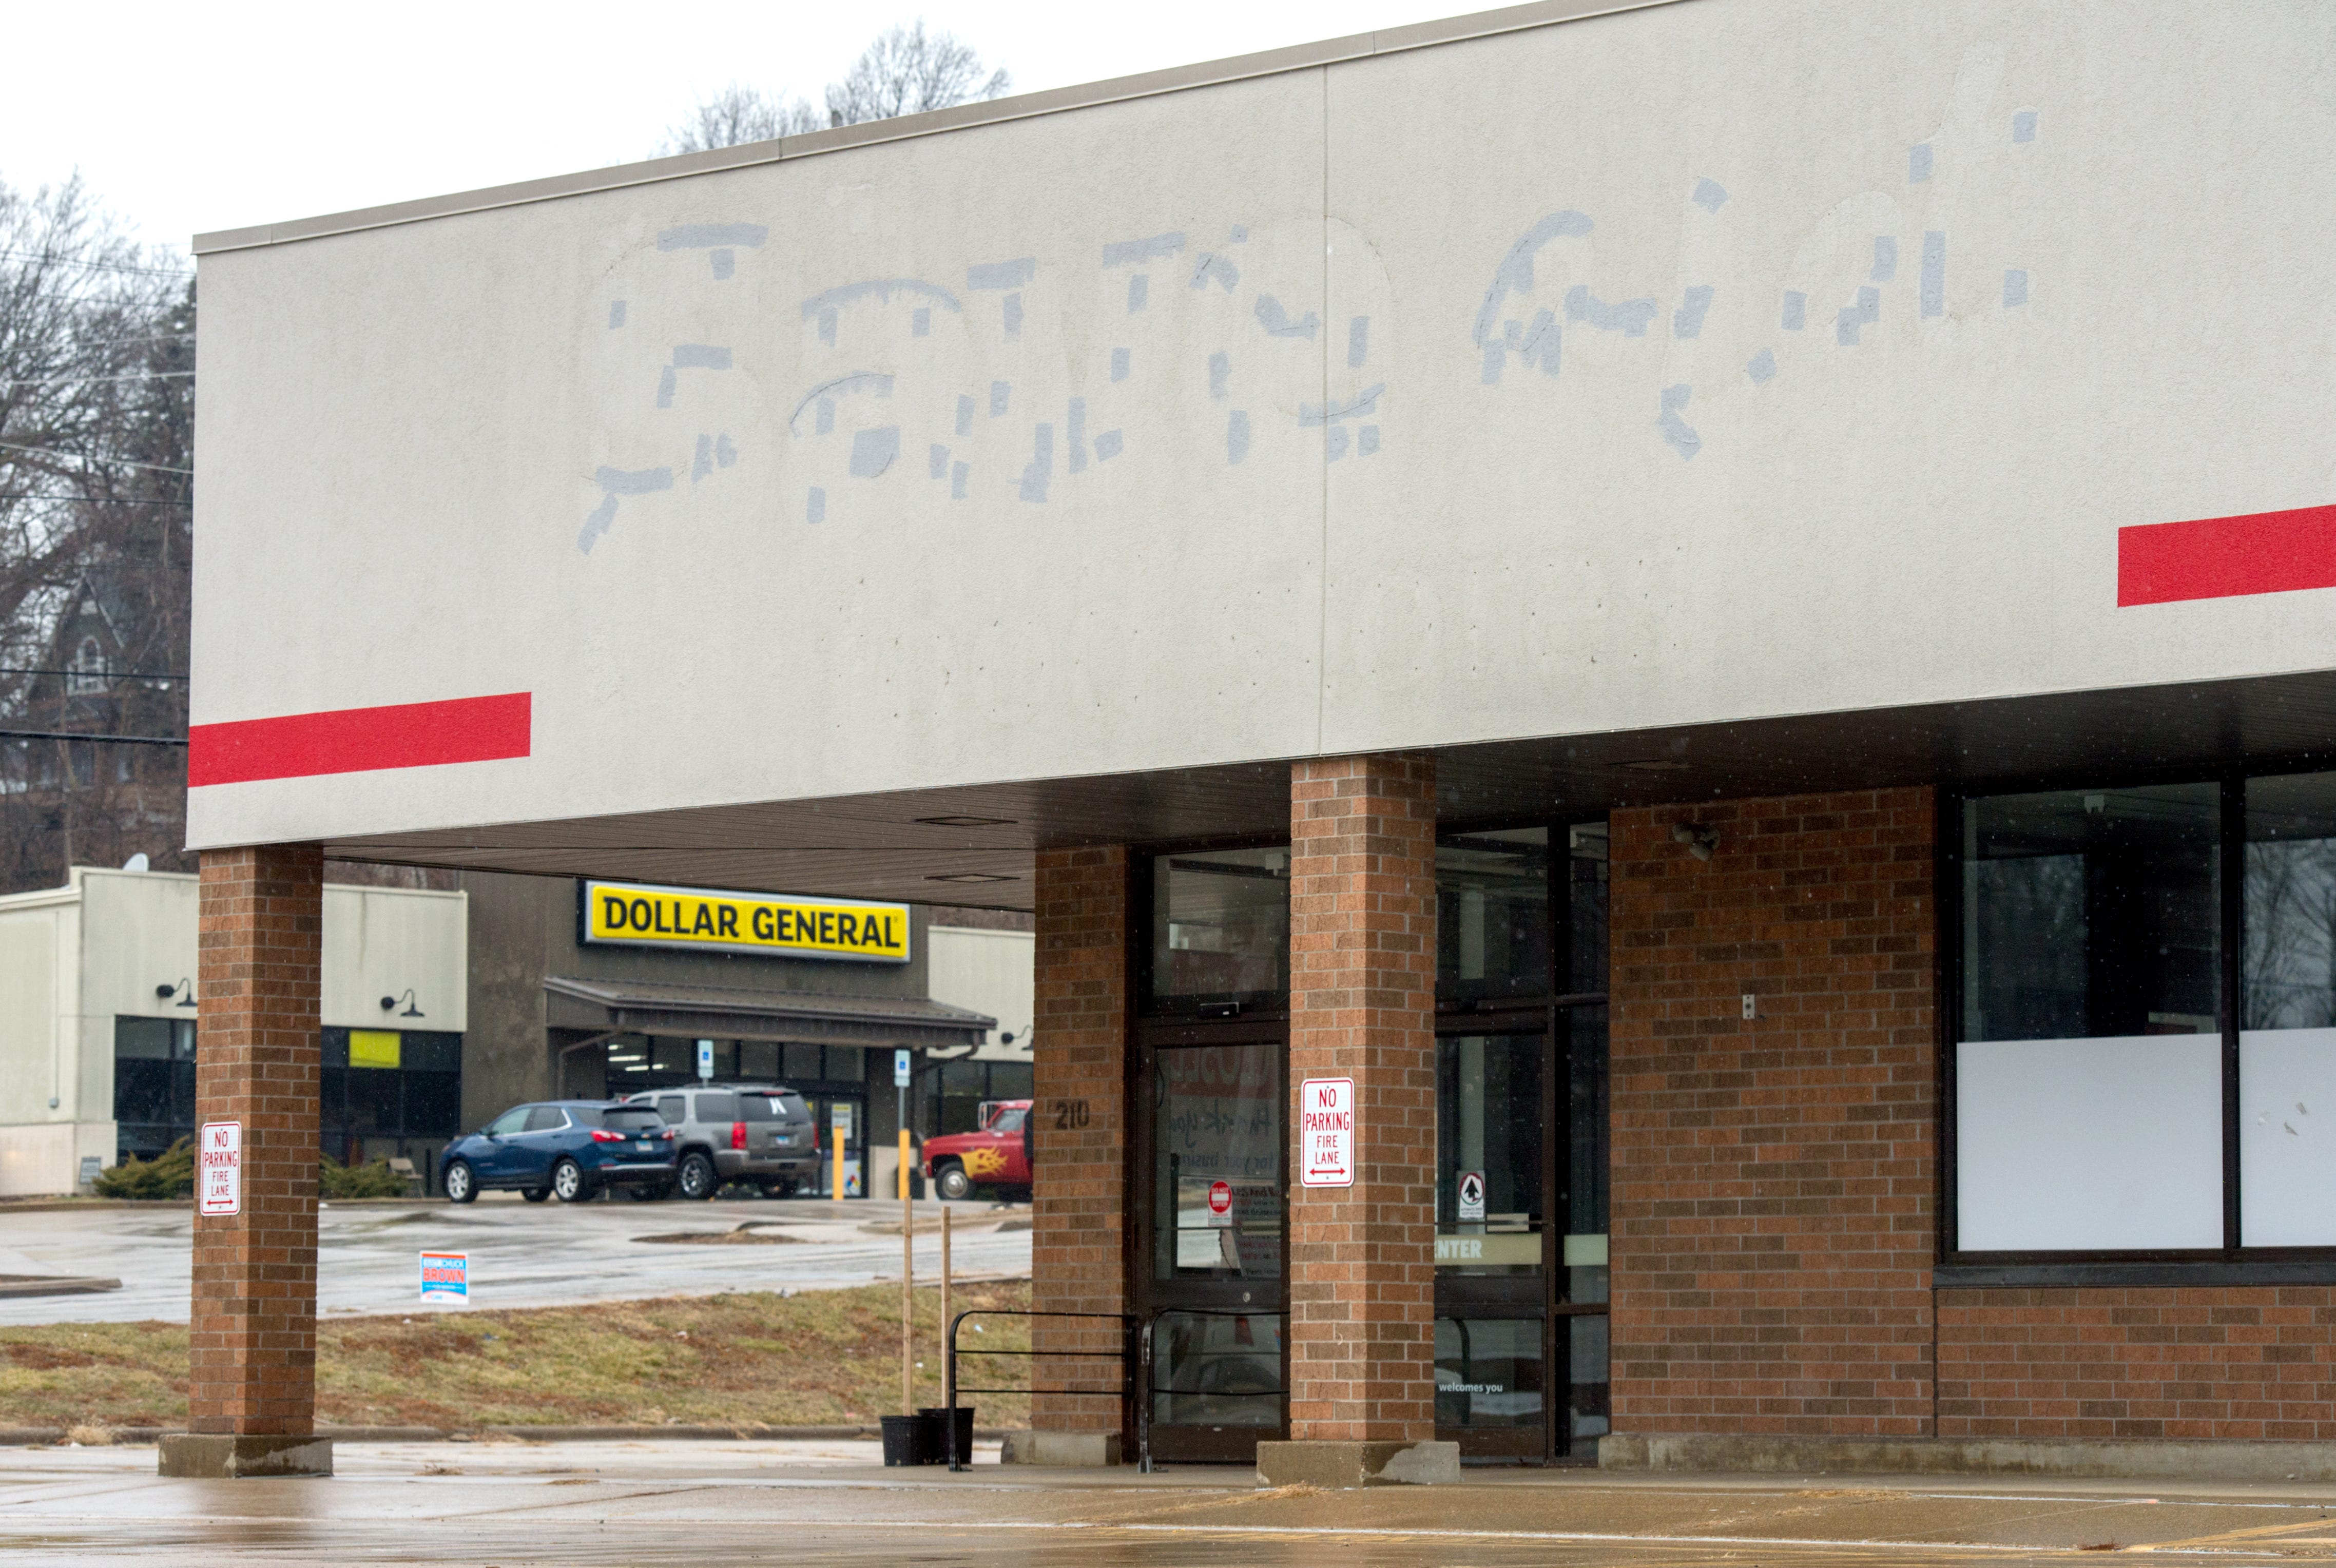 Across Western Avenue from Dollar General stands an abandoned Save-A-Lot, which closed in 2017, less than a year after opening in what had been an Aldi supermarket facility.